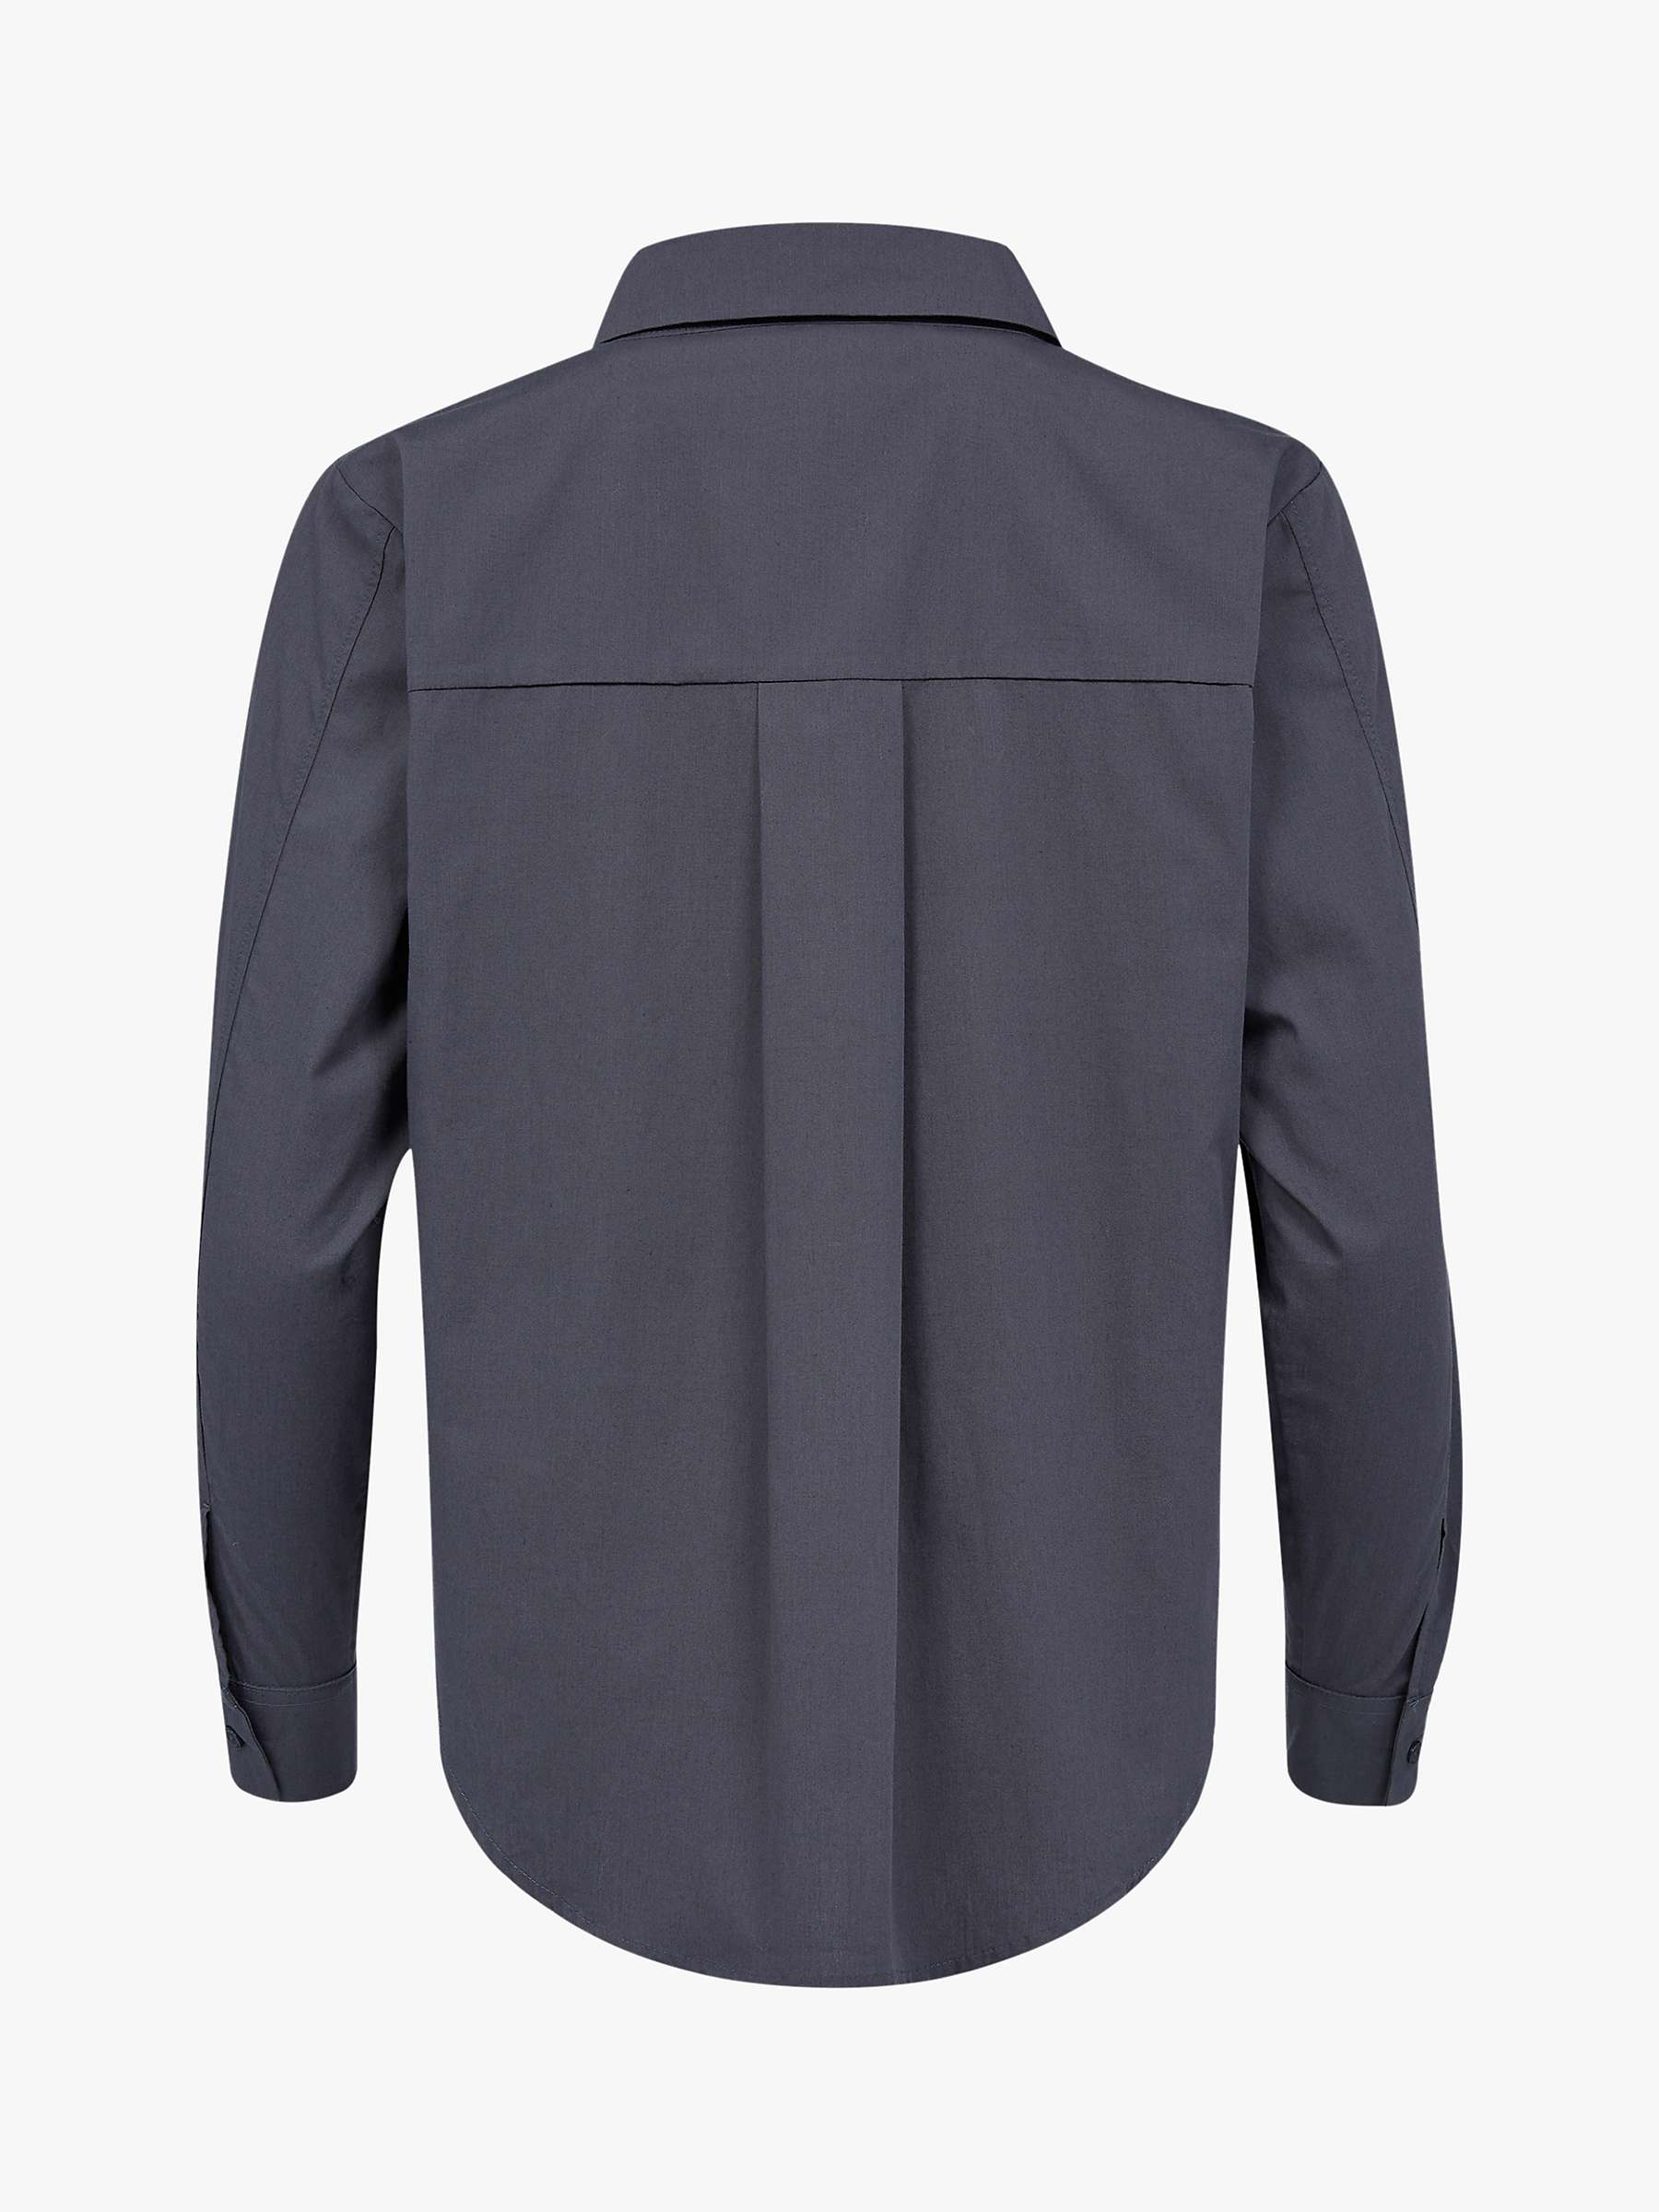 Buy Celtic & Co. Embroidery Detail Blouse, Slate Grey Online at johnlewis.com